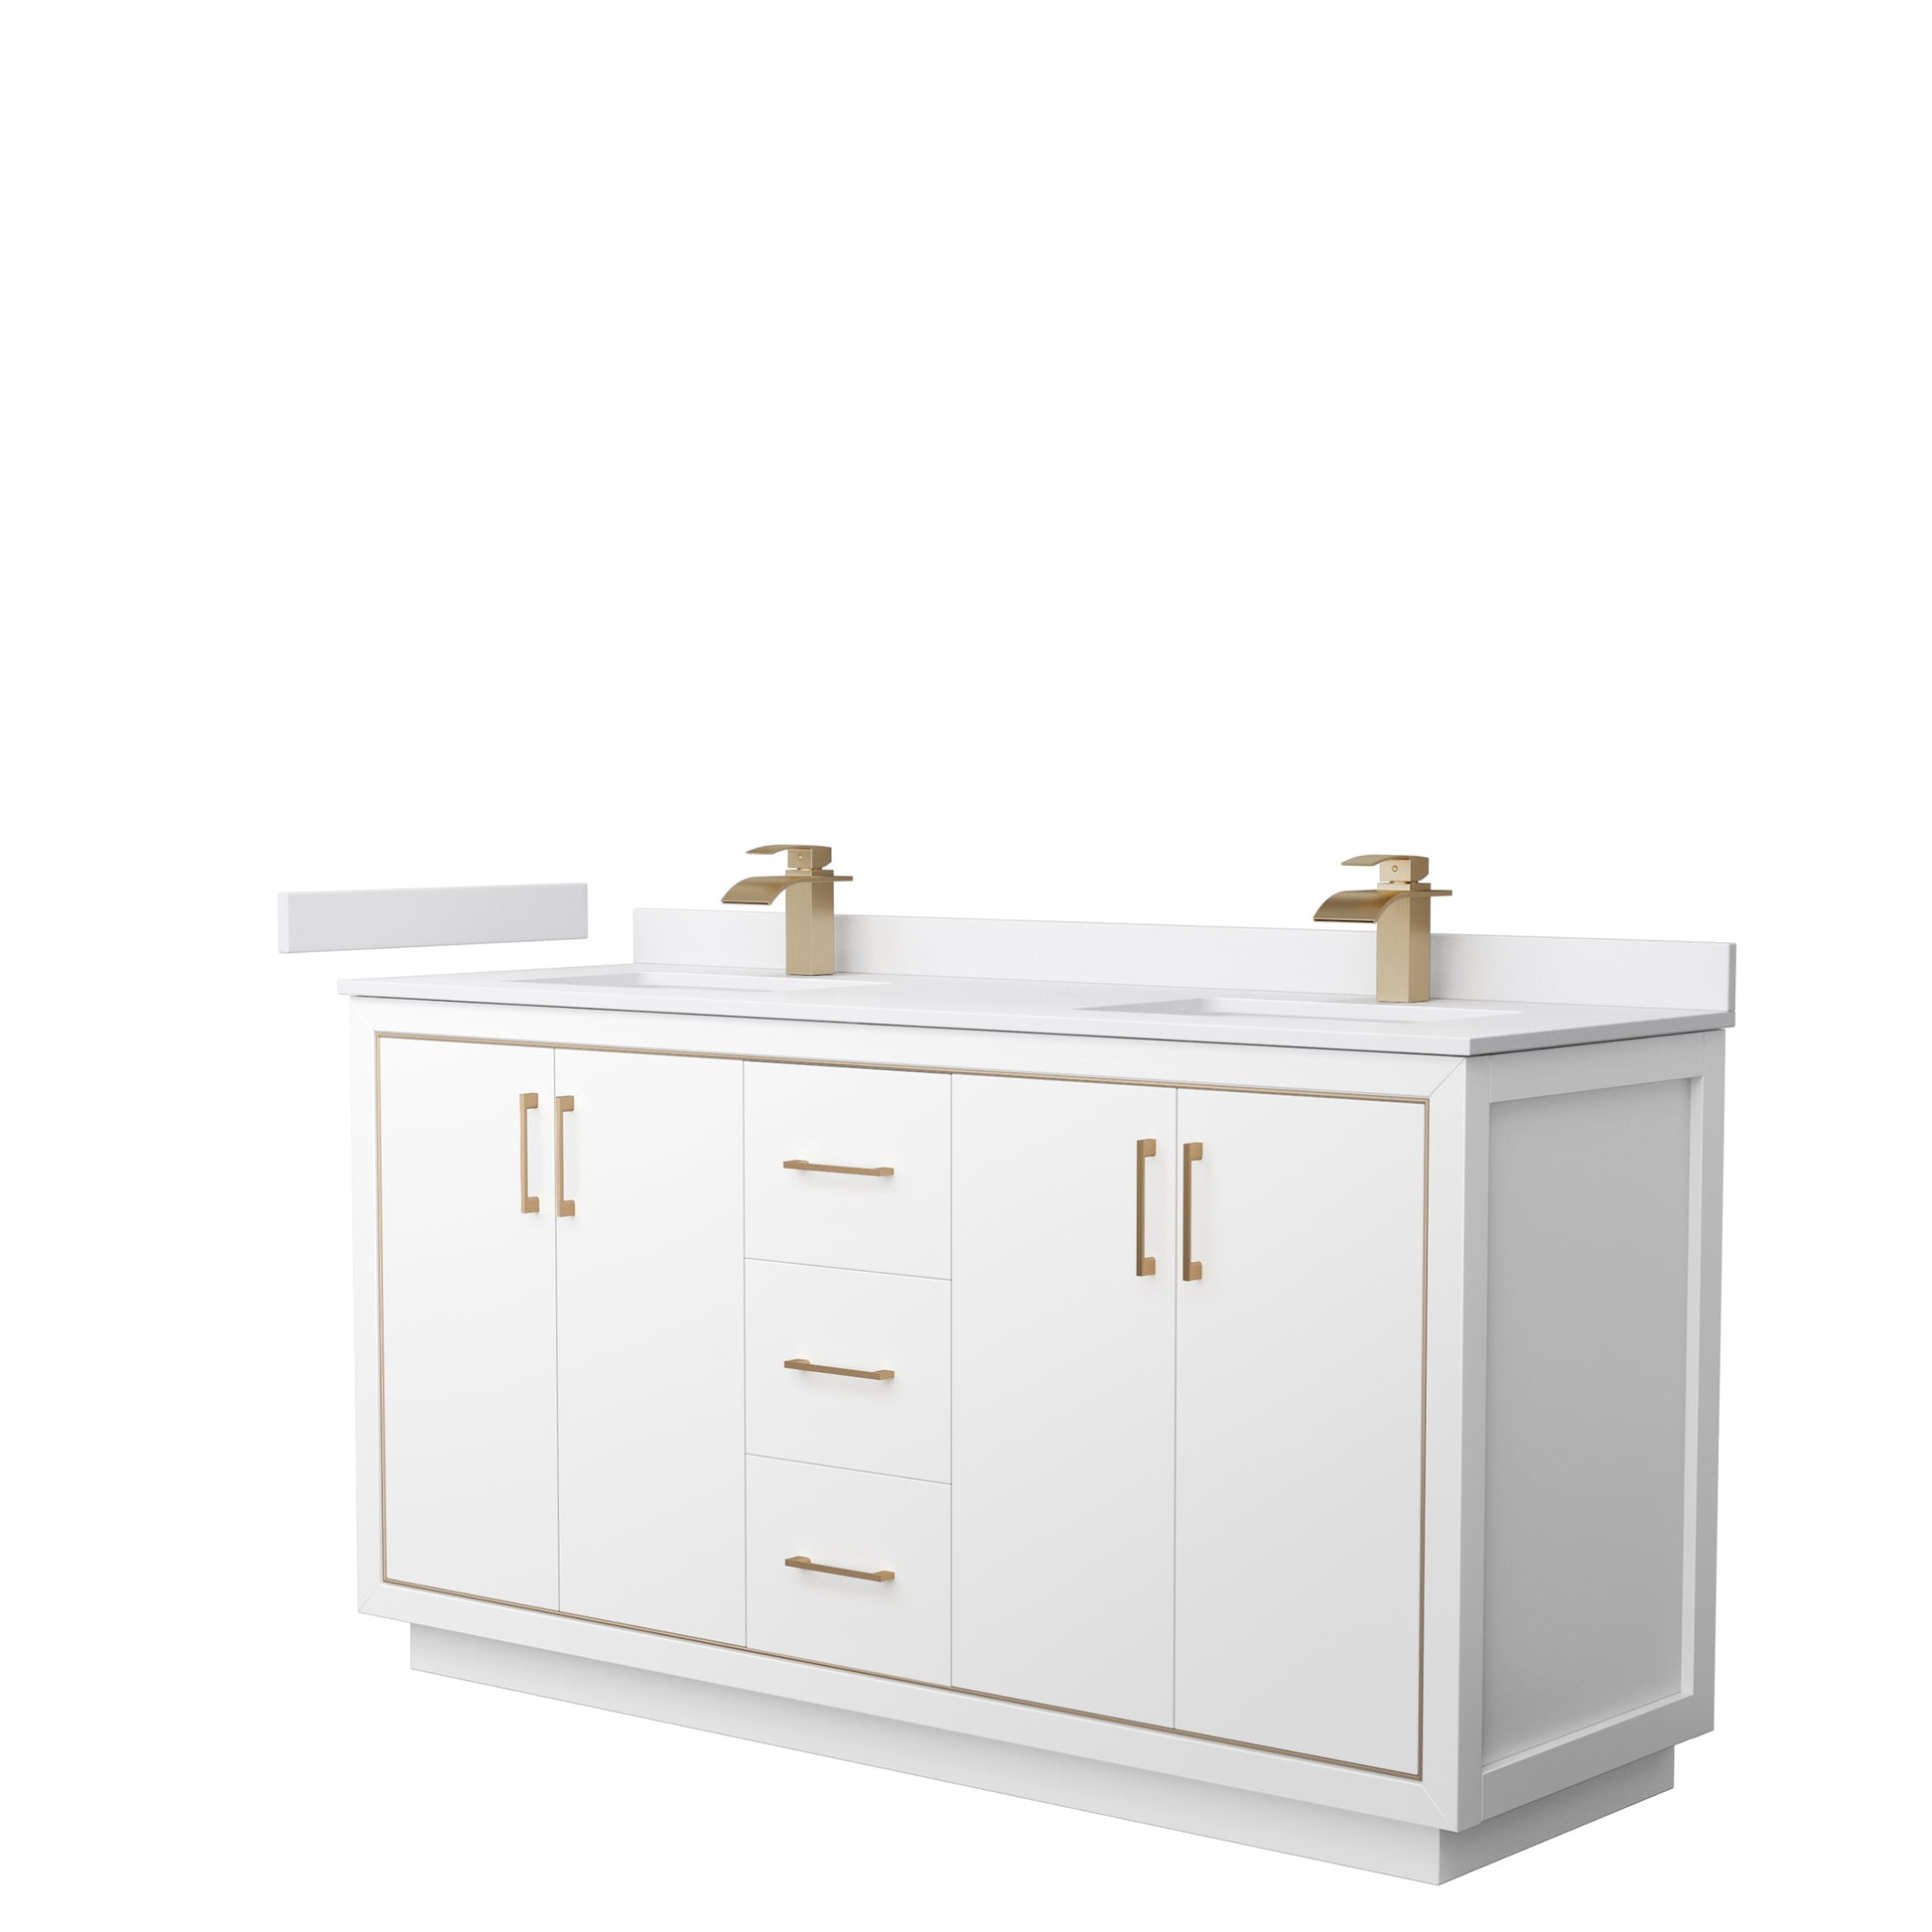 
  
  Icon Double Bathroom Vanity with White Cultured Marble, Undermount Square Sink, Optional Trim and Mirror
  
